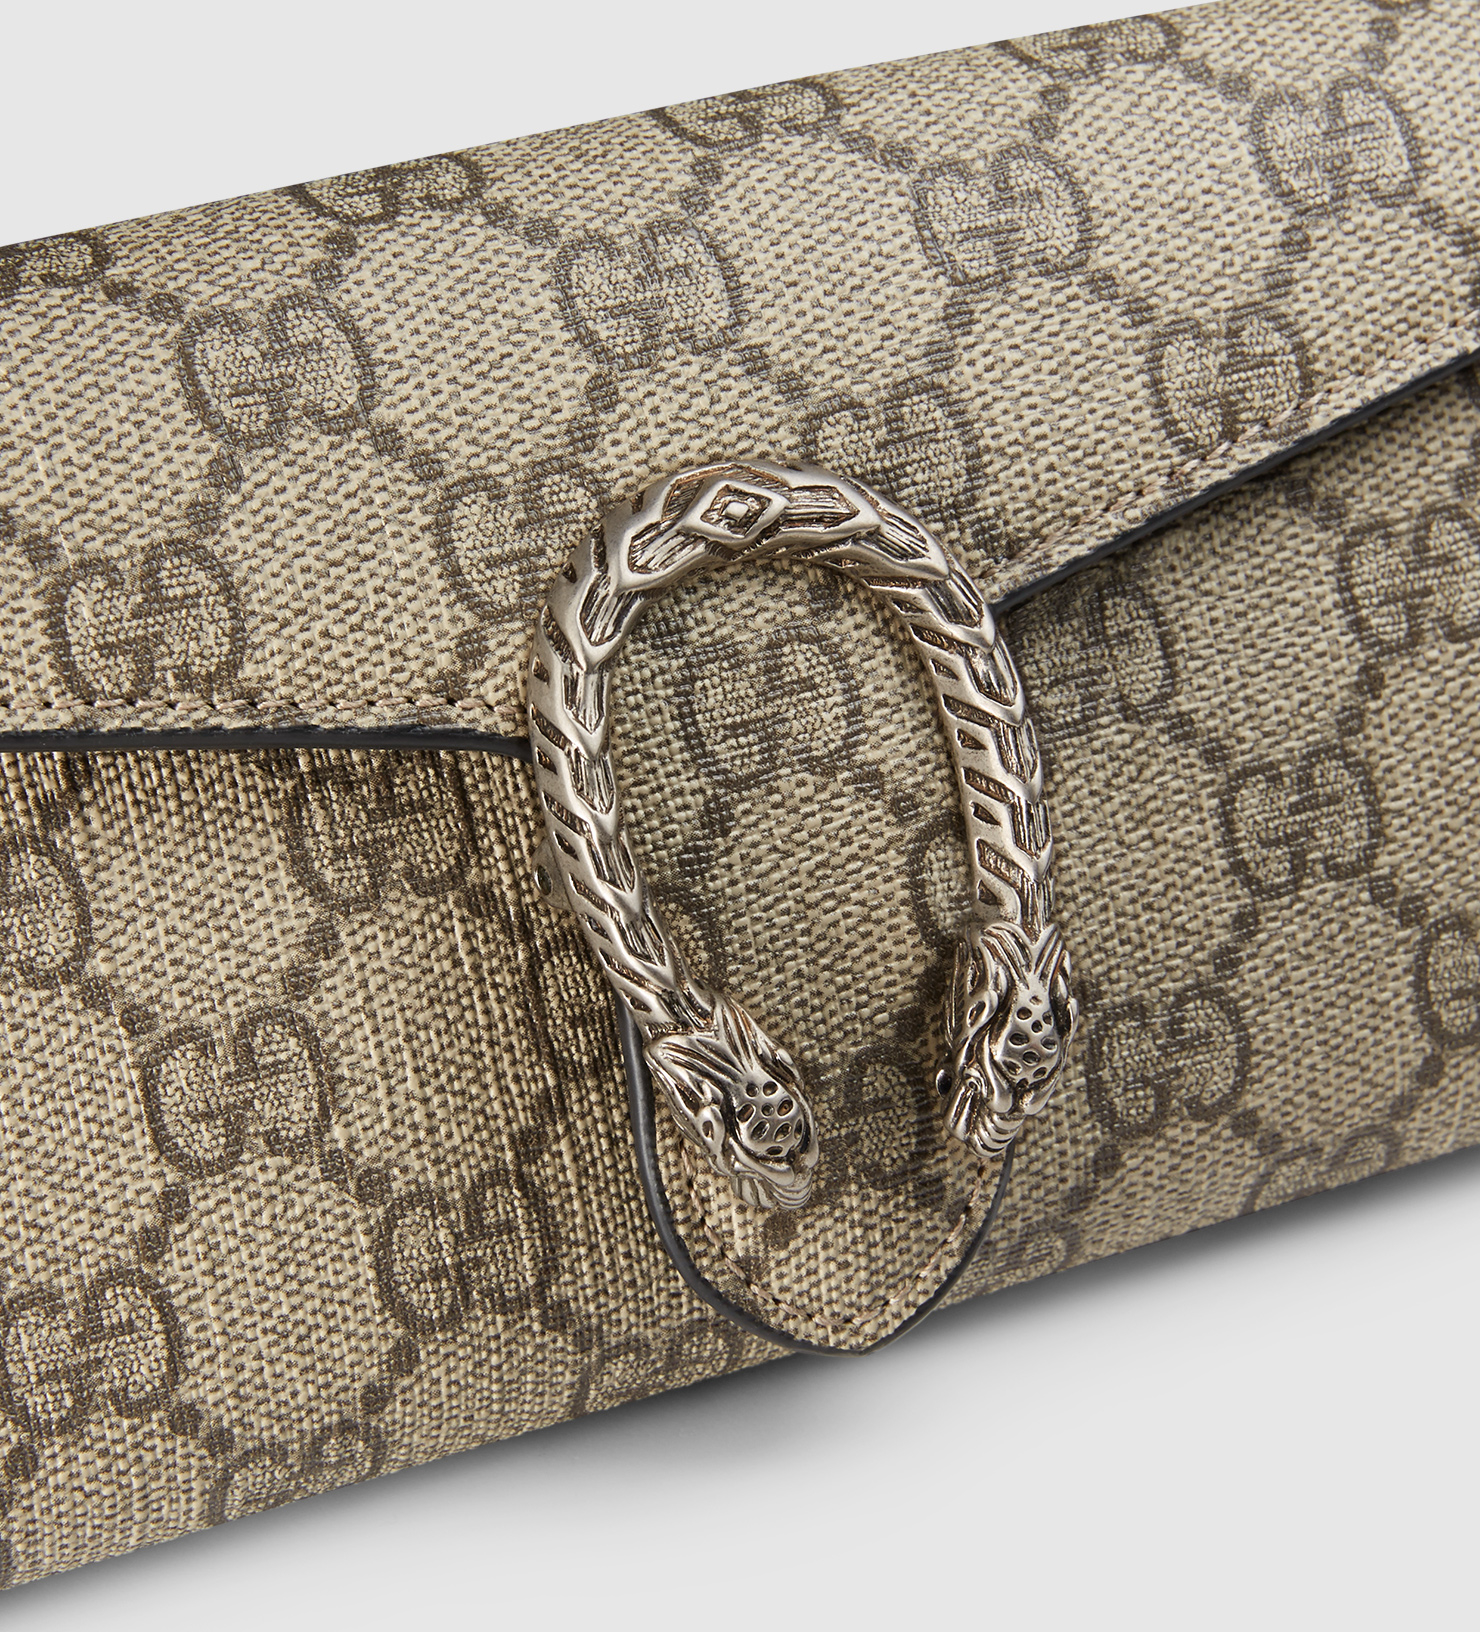 Gucci Canvas Dionysus Gg Supreme Chain Wallet in Natural - Lyst